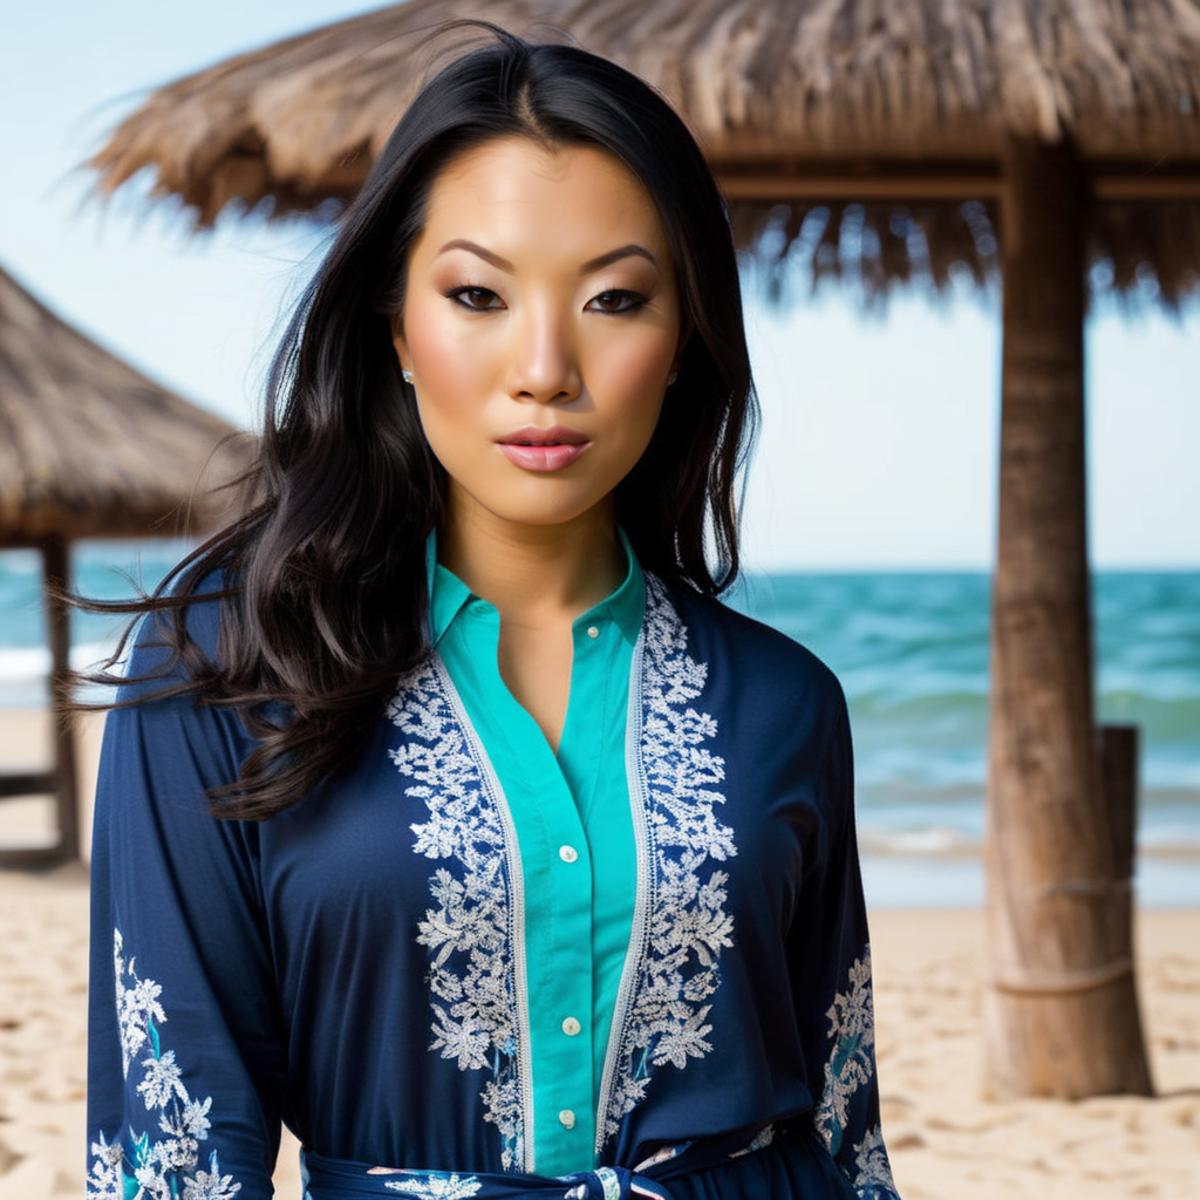 A beautiful woman in a blue flowery dress posing on the beach.